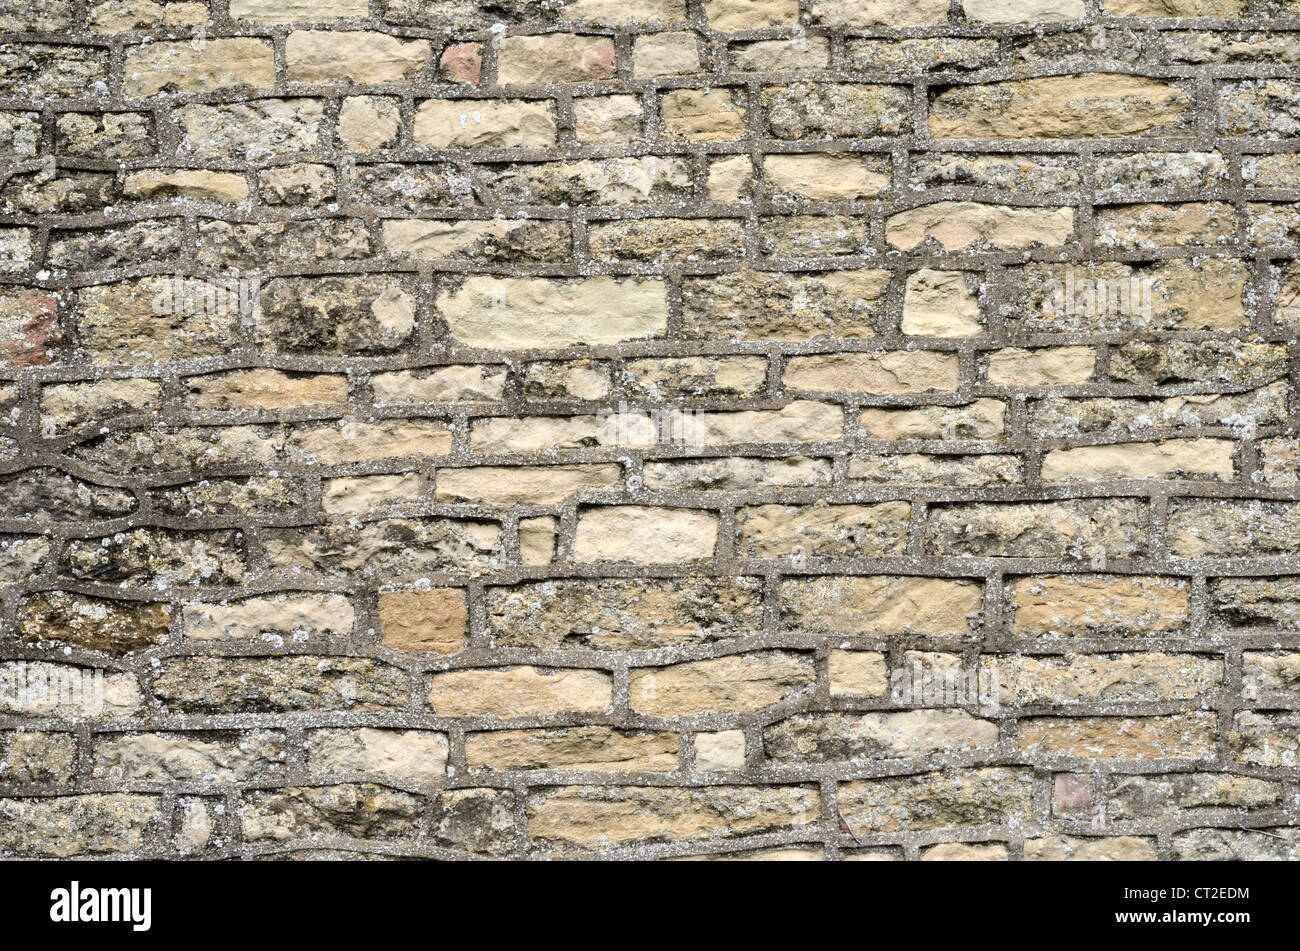 Stone building wall / detail of weathered sandstone - Cotswolds. Visual allegory for 'firewall' or file 'access denied', solid stone wall. Stock Photo